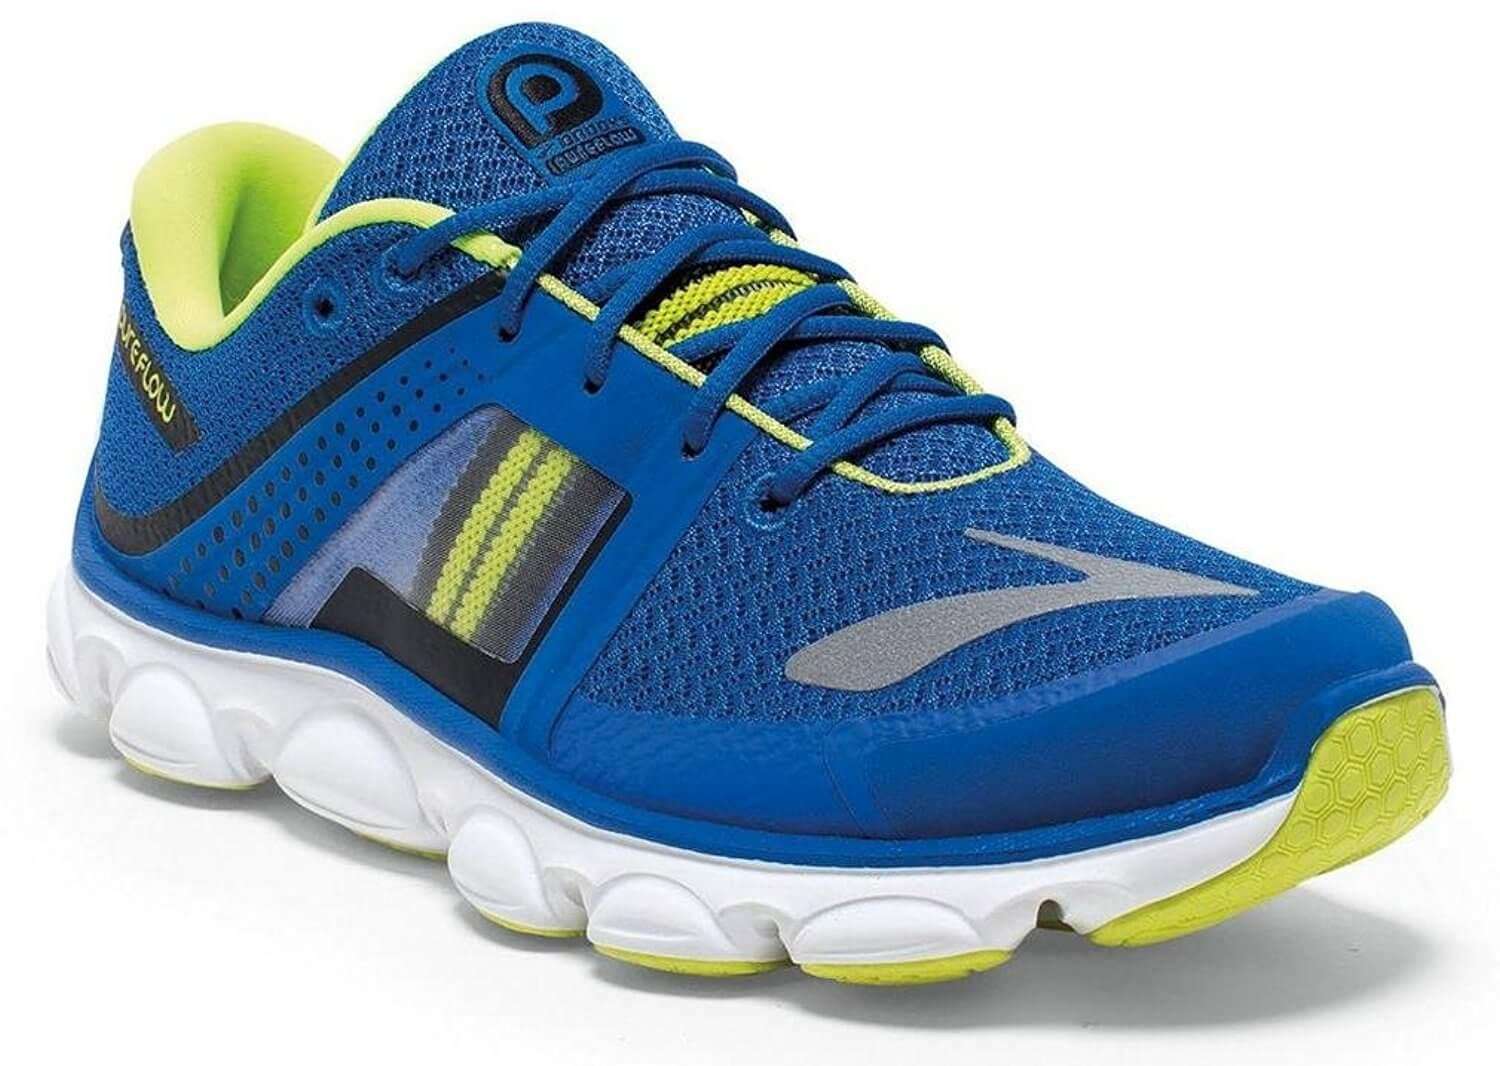 10 Best Girls Running Shoes Reviewed in 2018